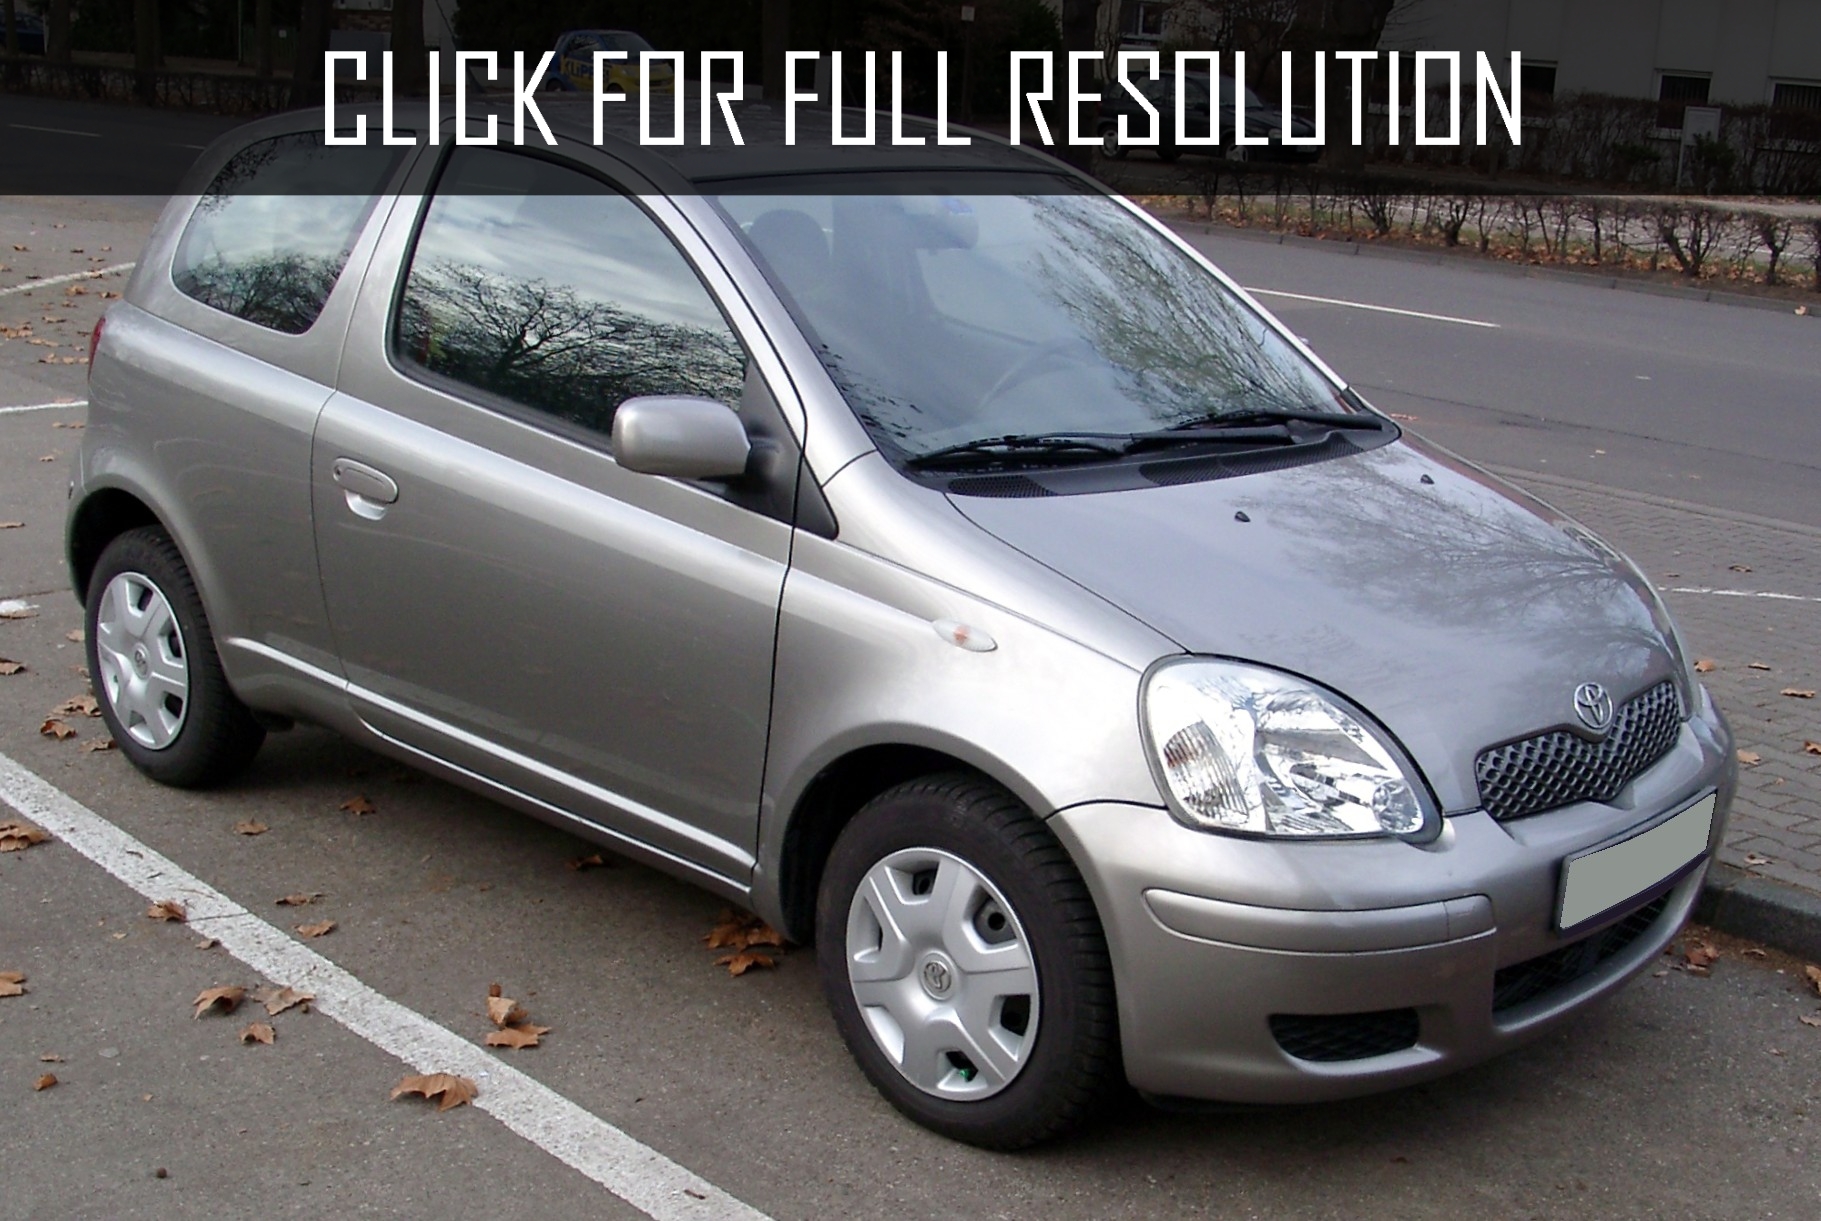 Toyota Yaris The Latest News And Reviews With The Best Toyota